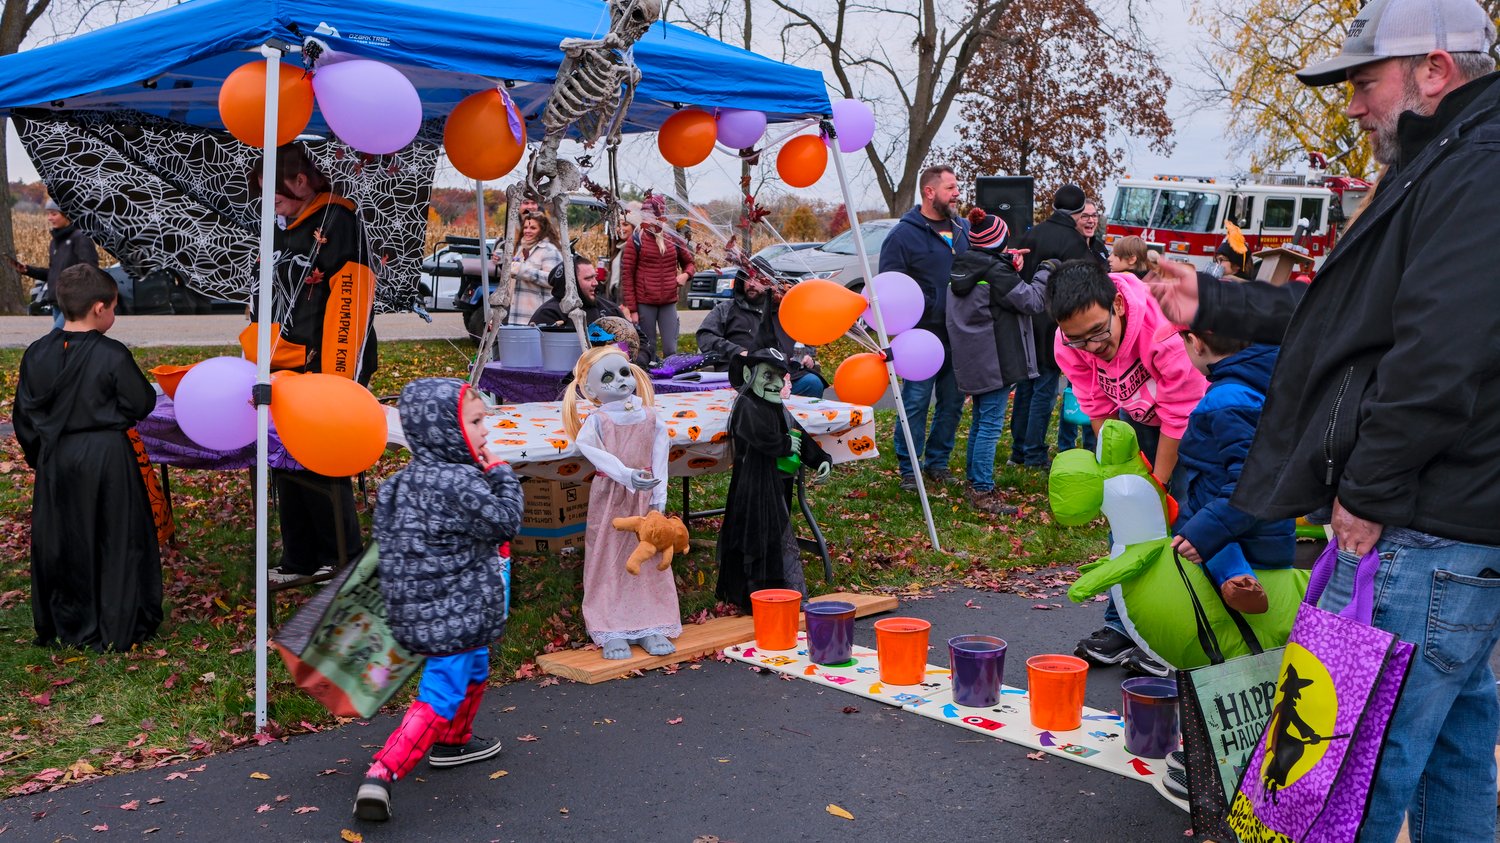 Bucket toss setup at the trunk or treat.